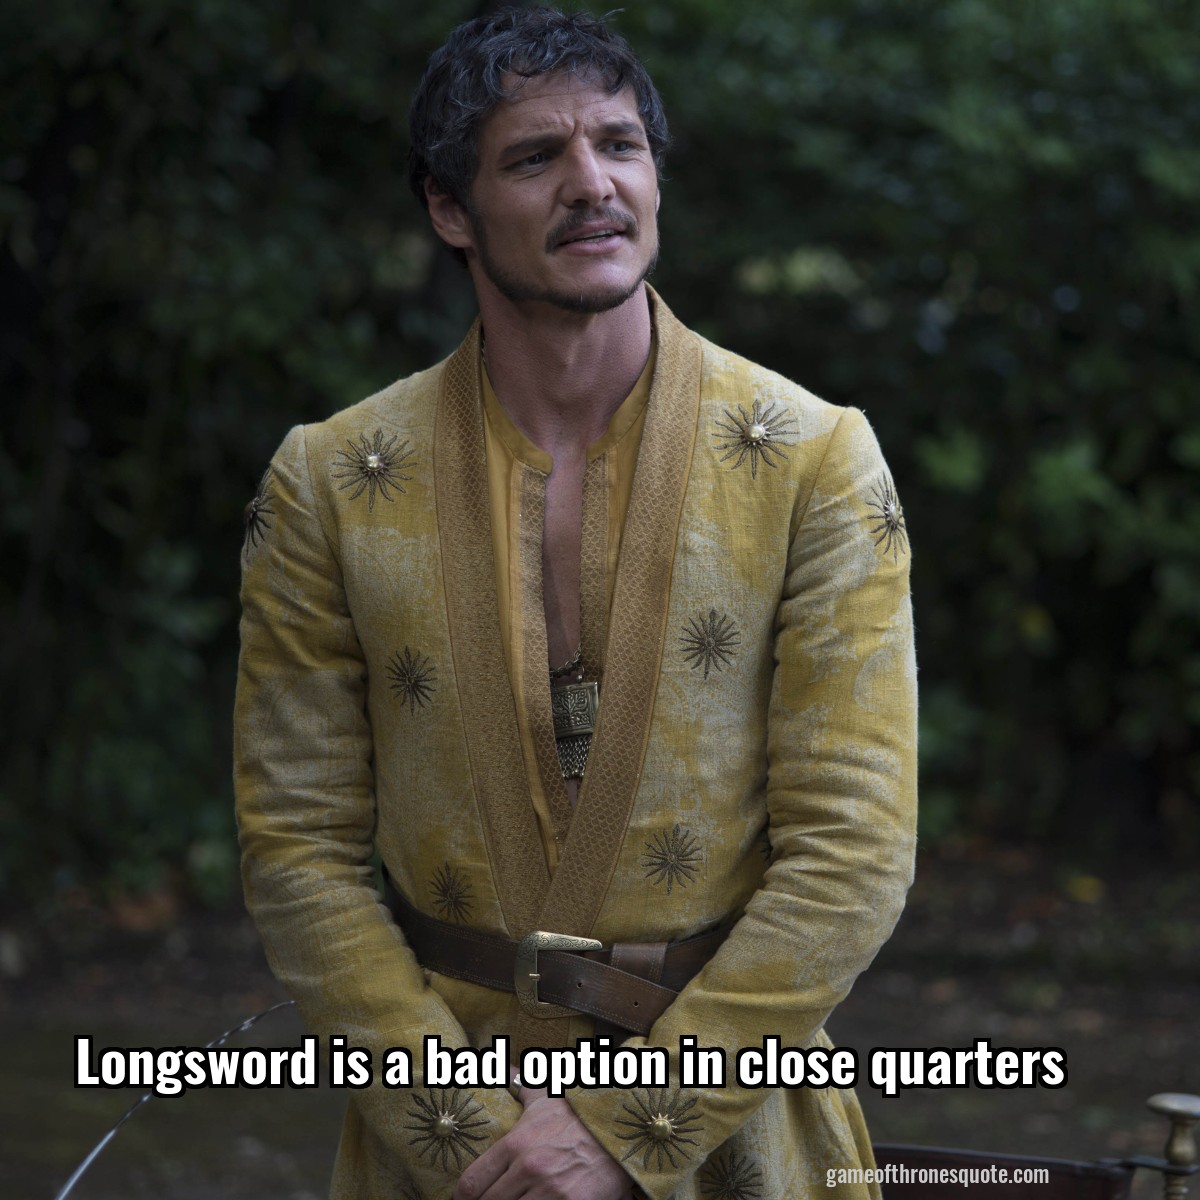 Longsword is a bad option in close quarters